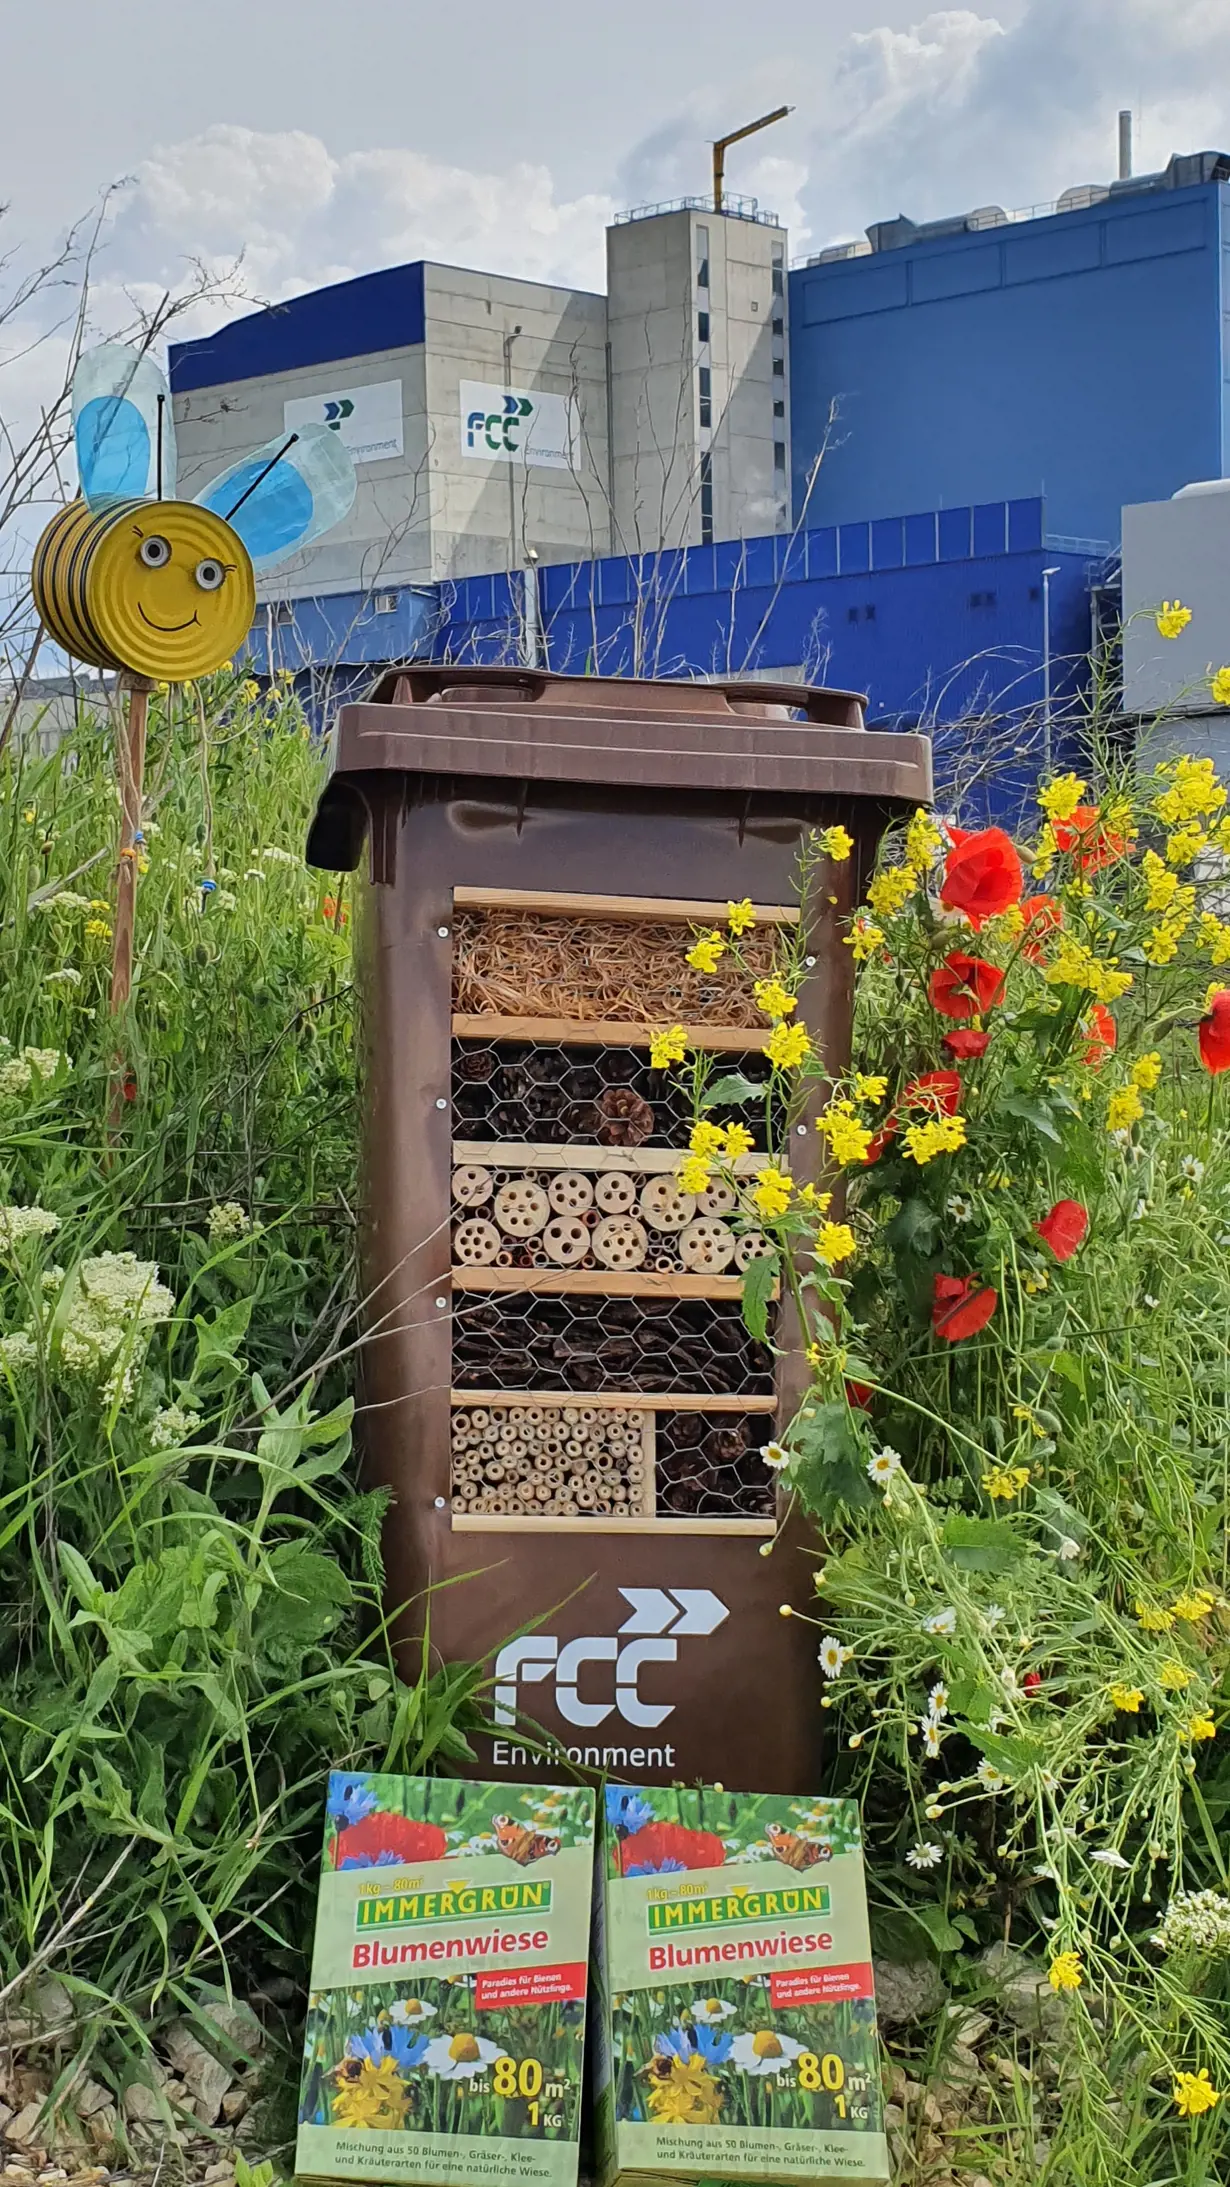 FCC Environment CEE celebrates ‚World Bee Day‘ - by creating the first bee pasture at our Waste-to-Energy Plant Complex in Zistersdorf